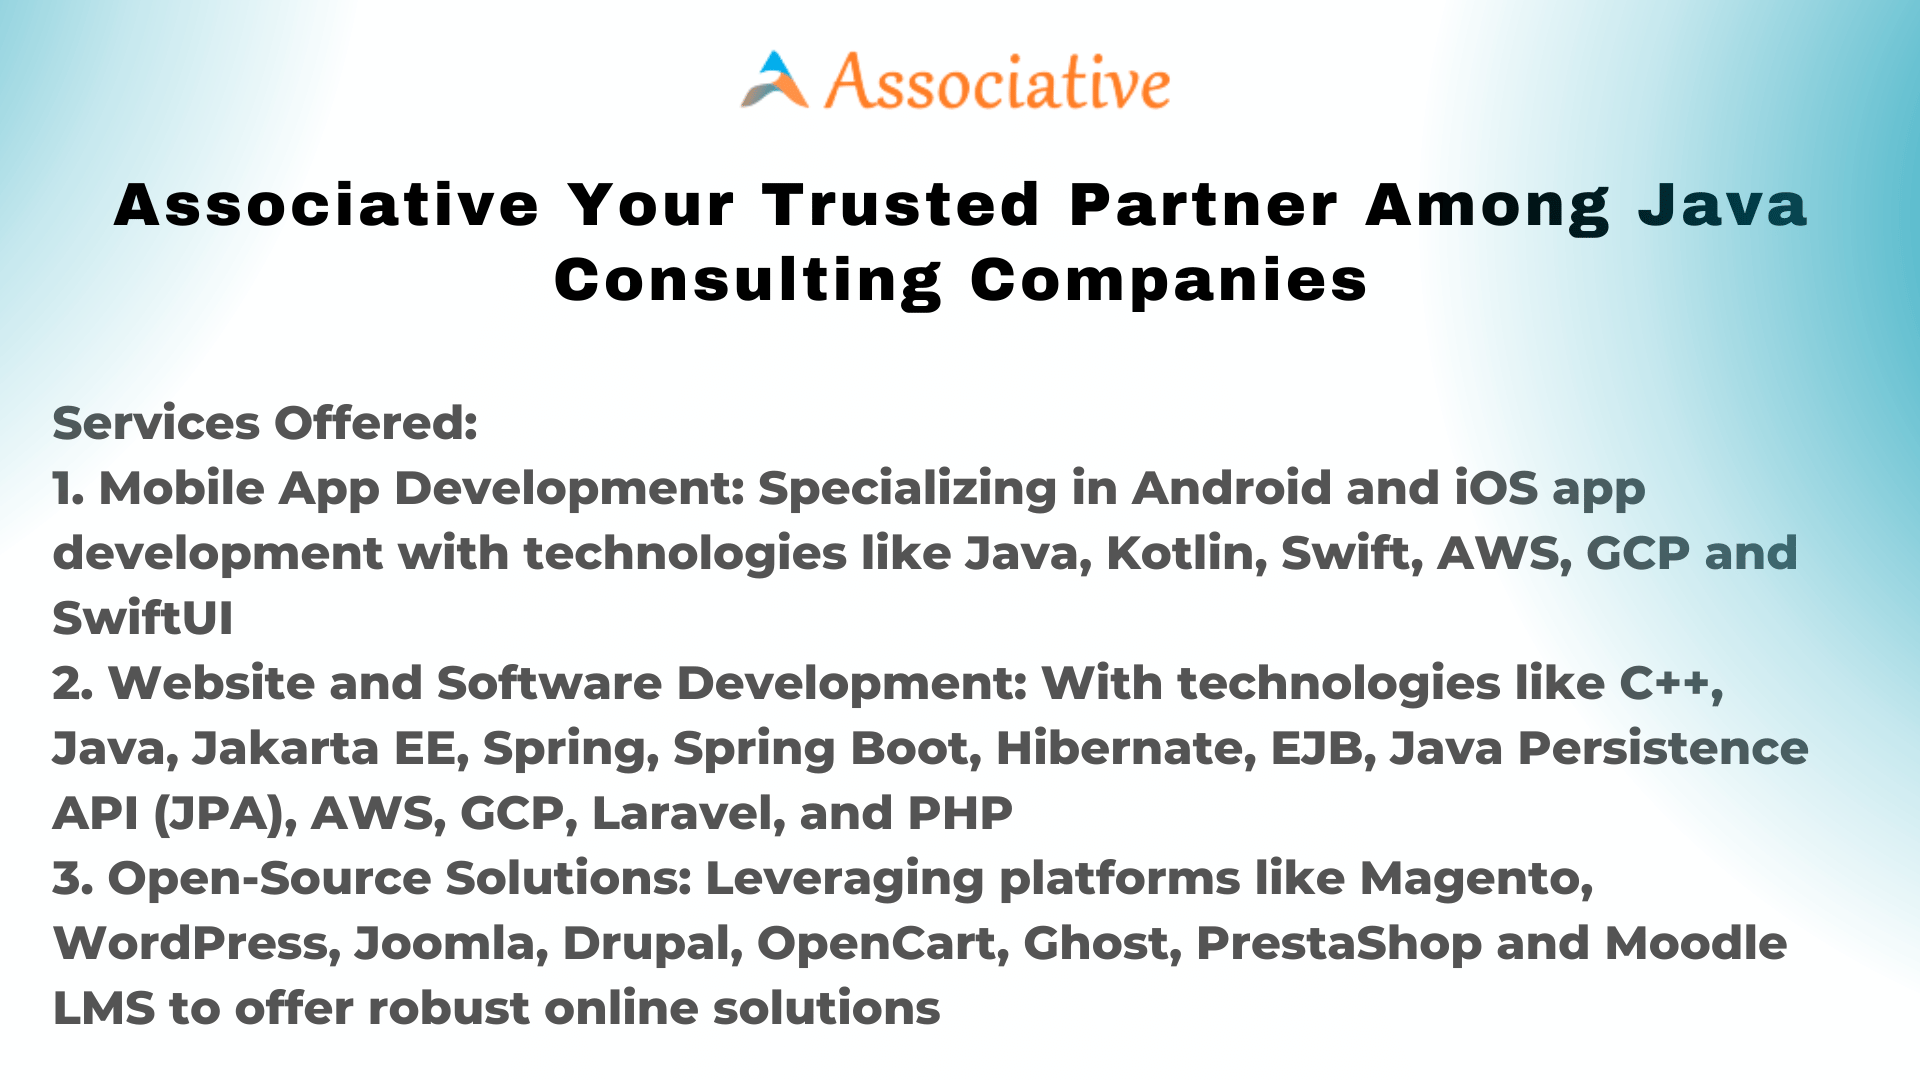 Associative Your Trusted Partner Among Java Consulting Companies